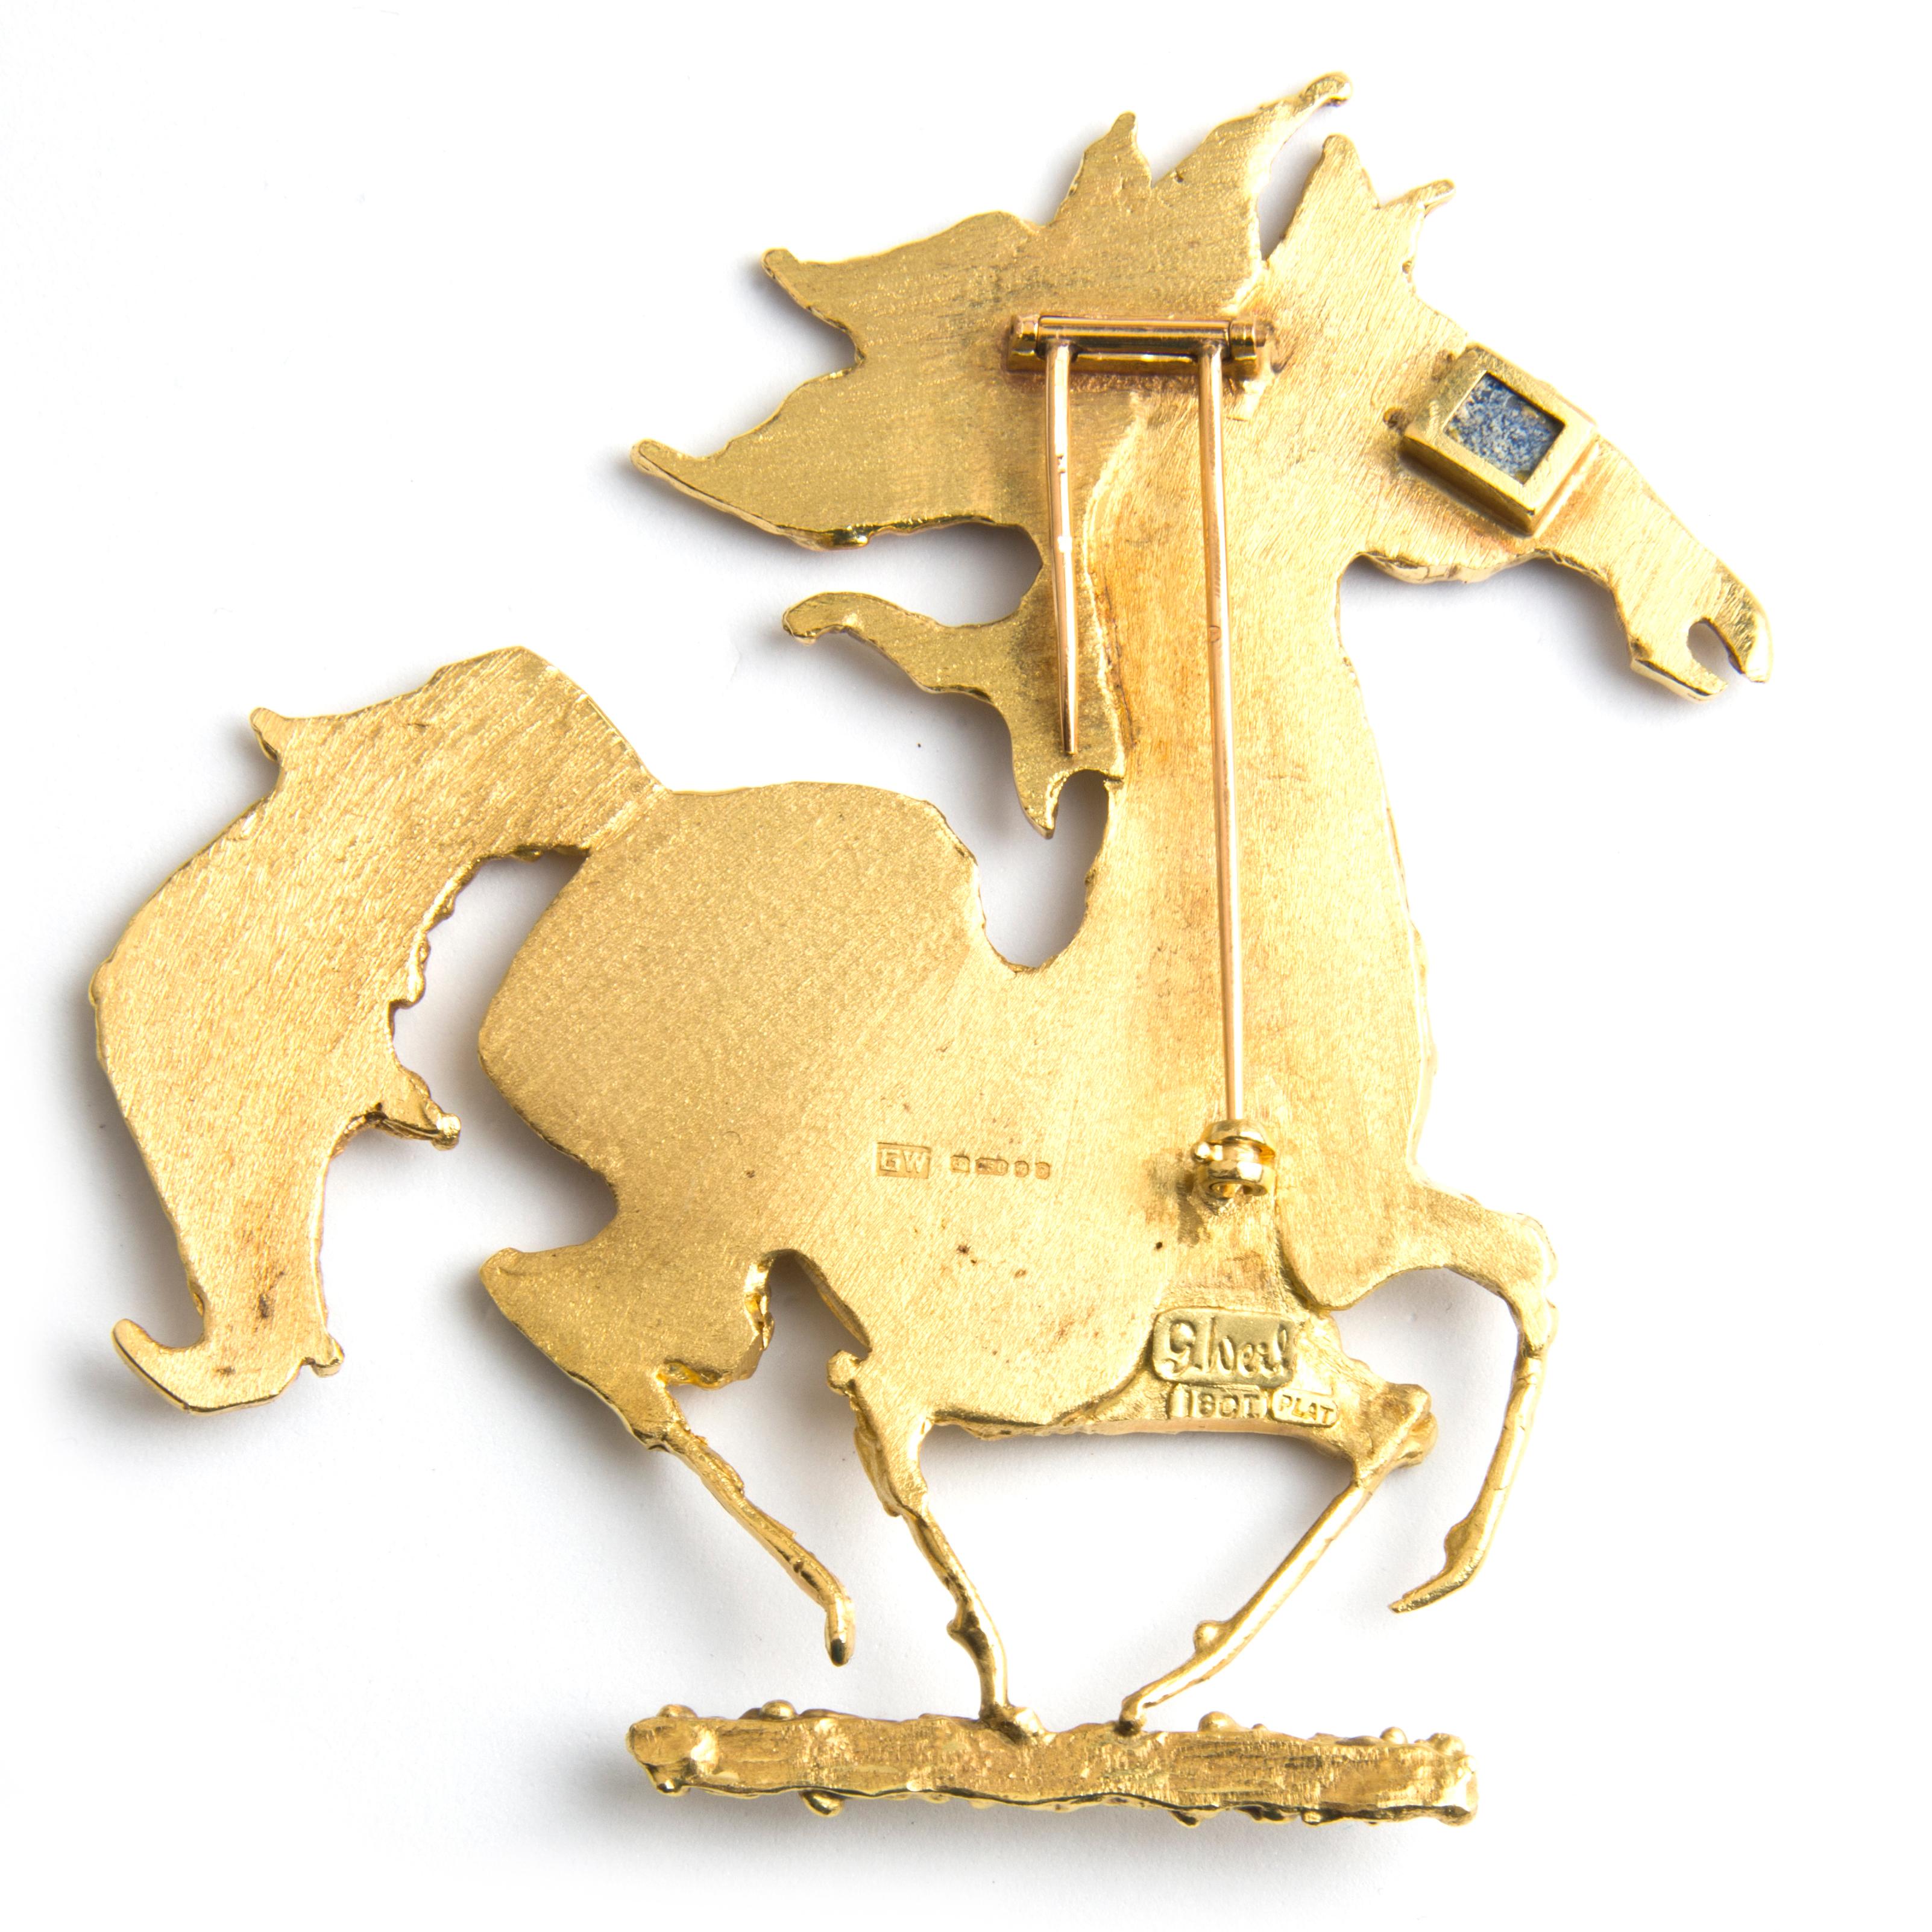 Brooch by George Weil designed as a galloping horse, yellow gold, with a Lapis Lazuli eye.
Signed G. Weil, maker's mark, English hallmarks, marked 18k and PLAT
1970s
Unique

George Weil is a London jeweller who made a career in the 1960s and 70s.